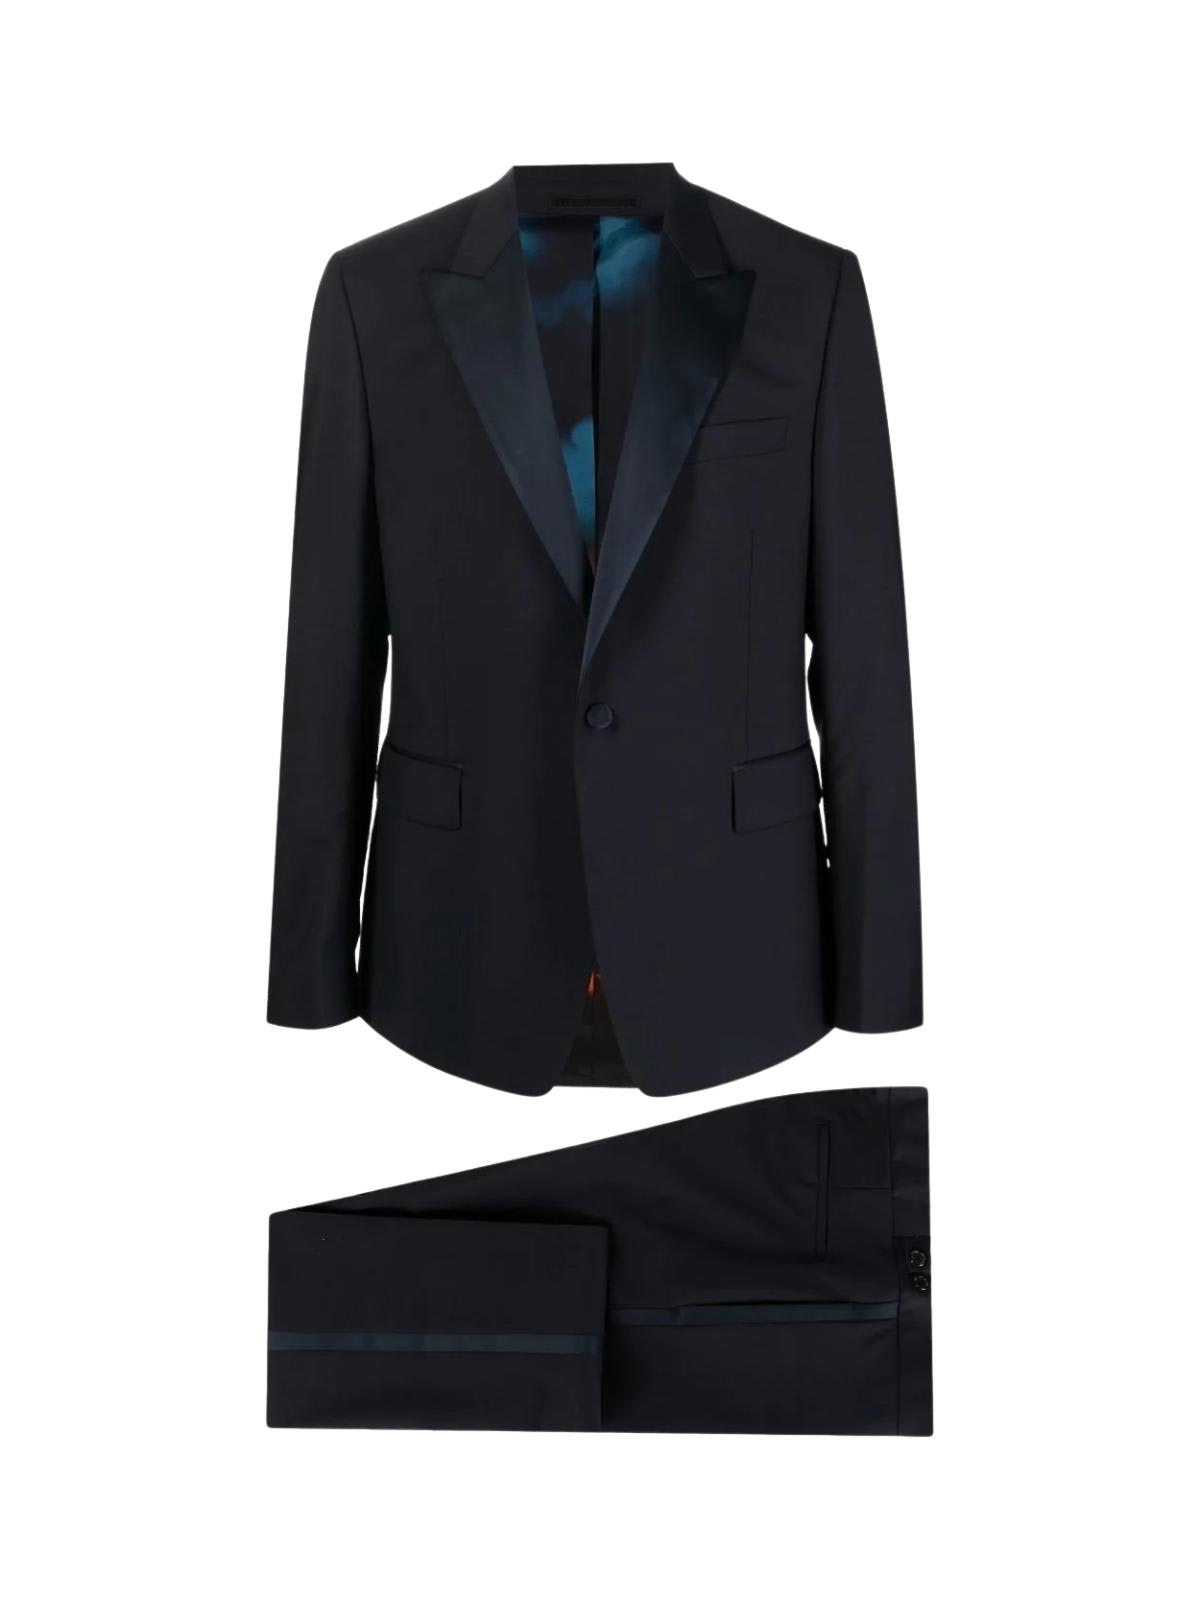 Paul Smith Gents Tailored Fit 1btn Evening Suit